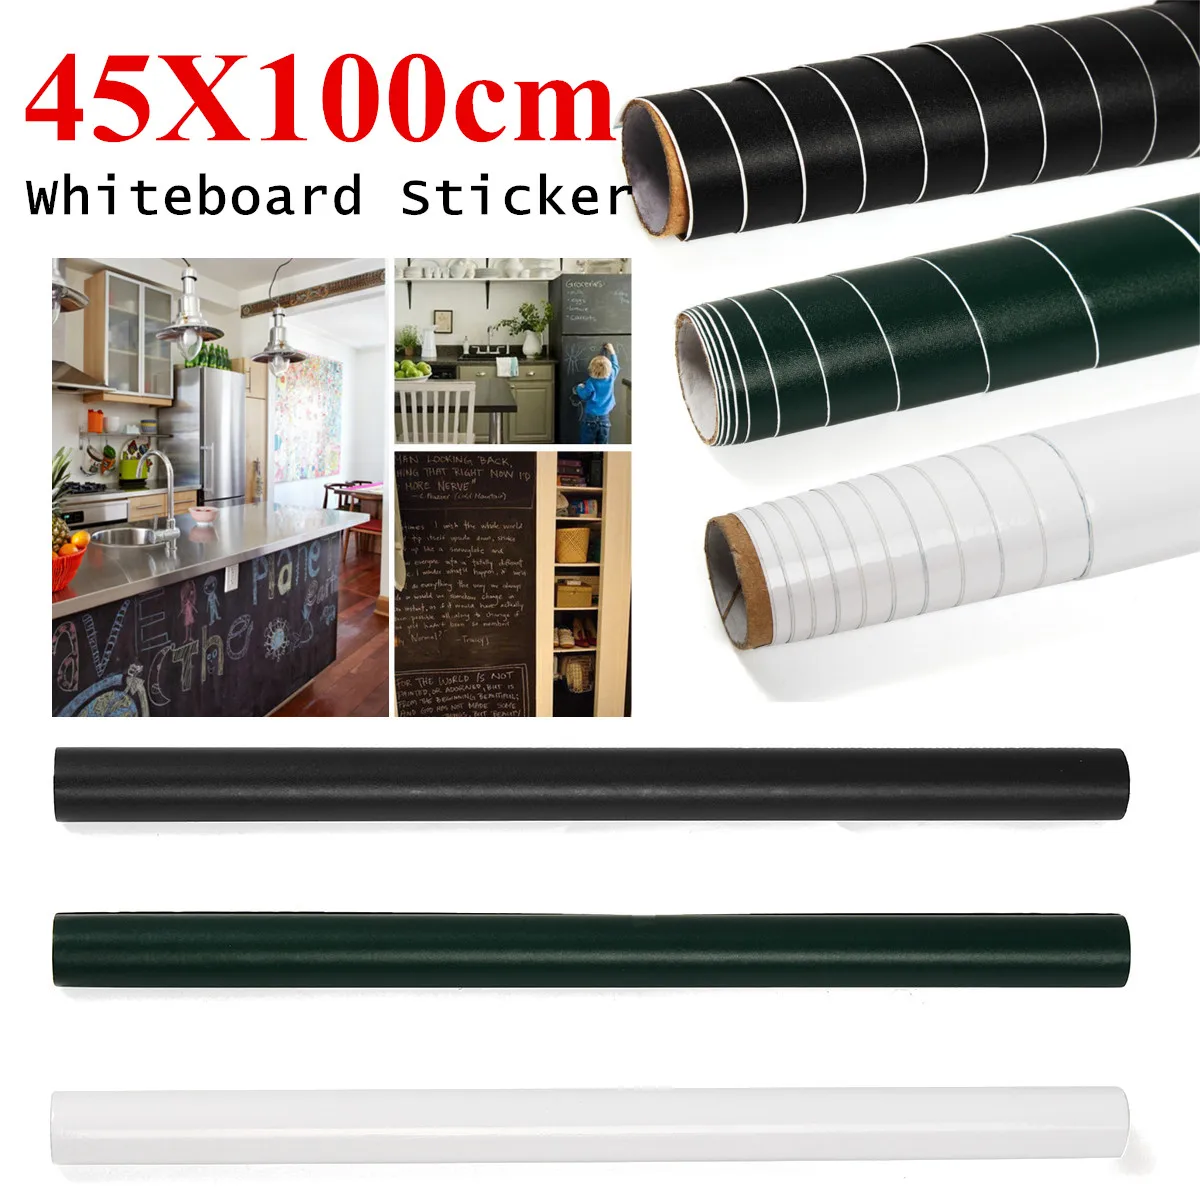 

Whiteboard Sticker Self-adhesive Writing Memo Board Dry Removable Erase Planner Drawing Writing Sticker For School Home 45x200cm